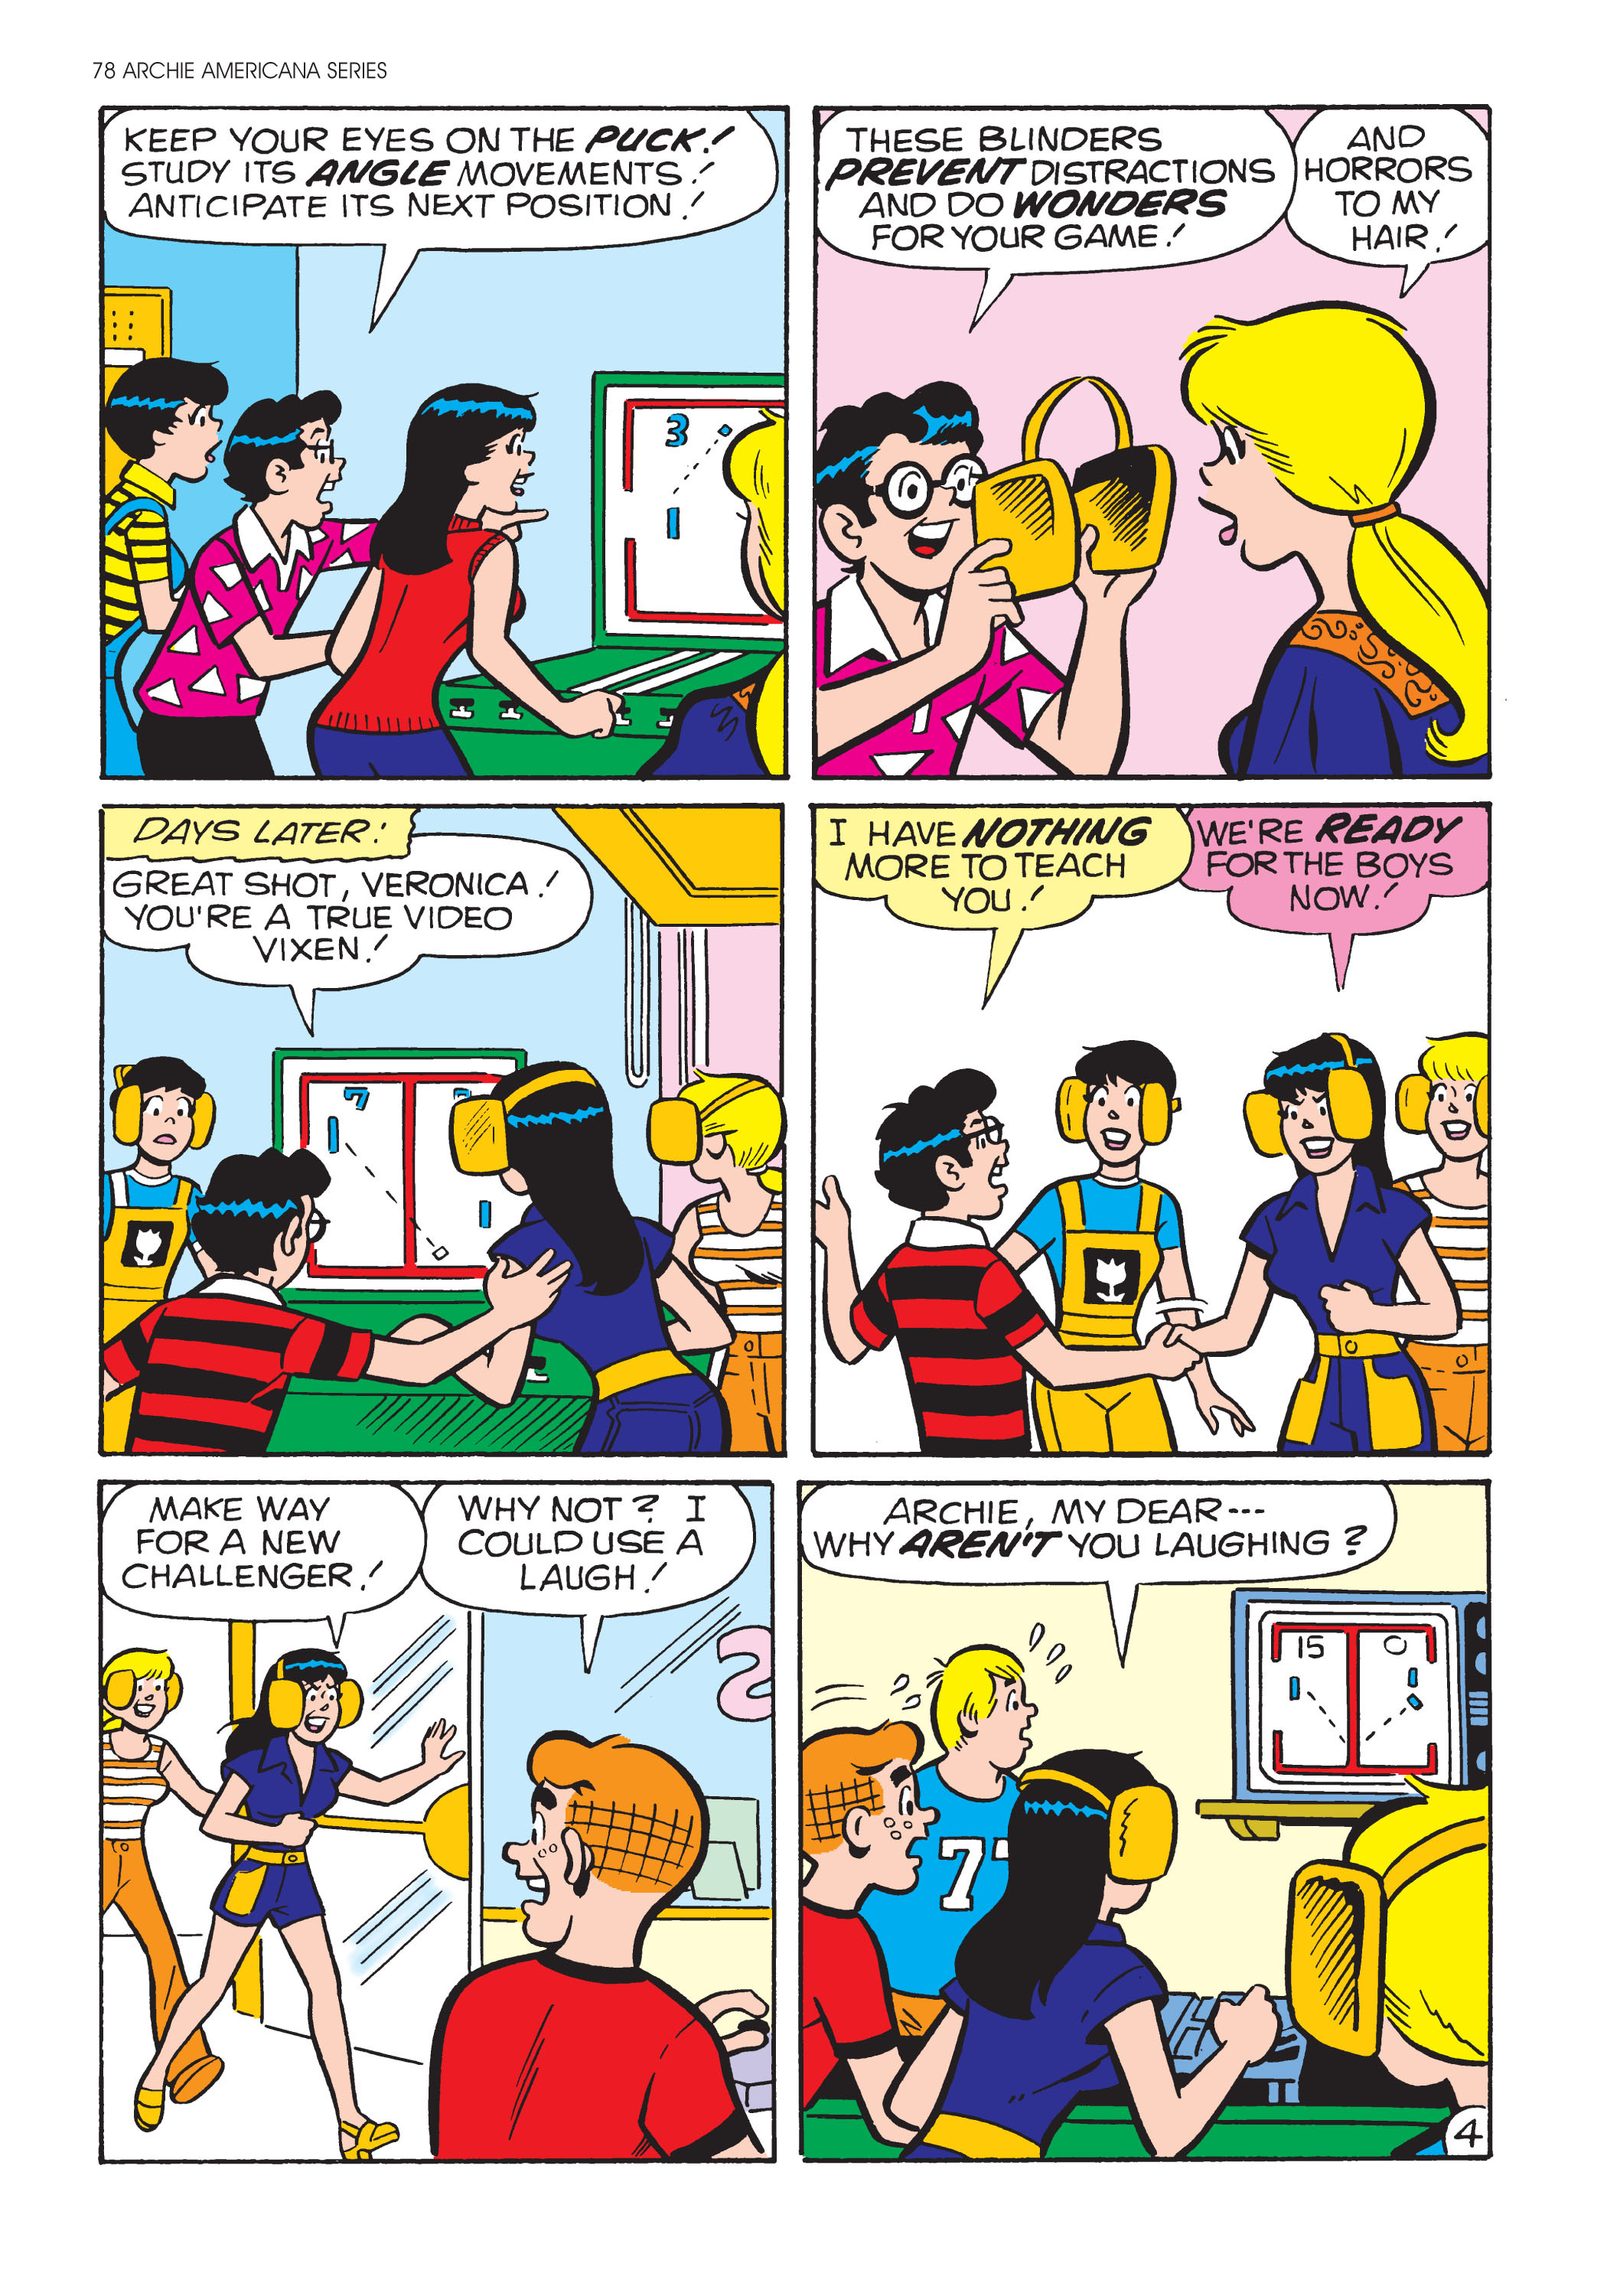 Read online Archie Americana Series comic -  Issue # TPB 4 - 80